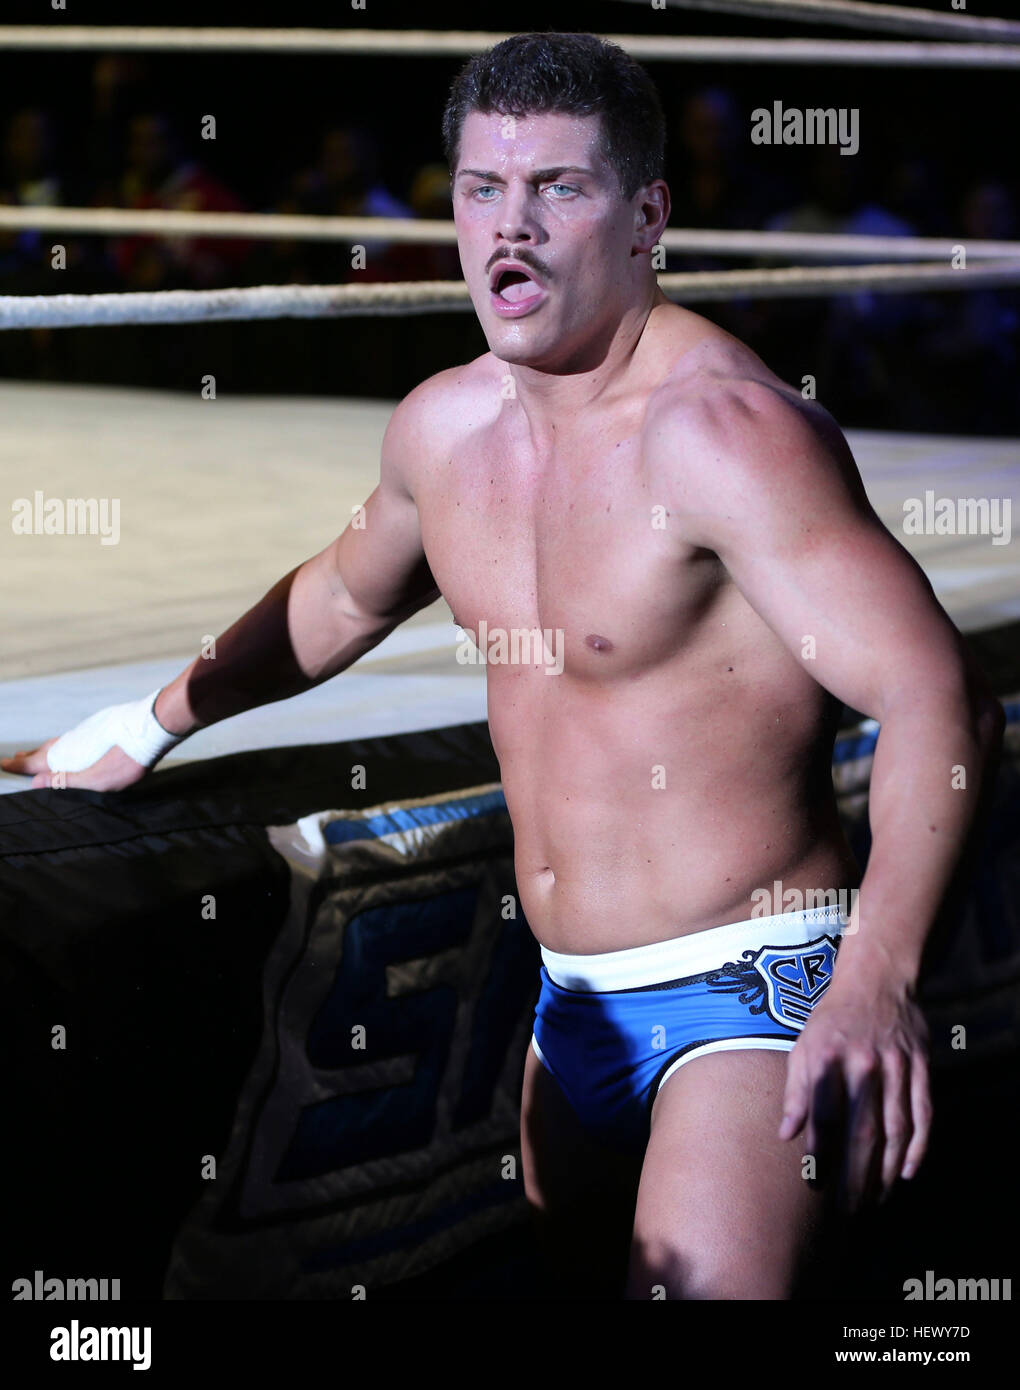 DURBAN, SOUTH AFRICA - AUGUST 01: Cody Rhodes during the WWE World Tour 2013 at Westridge Park Stadium on August 01, 2013 in Durban, South Africa. (P Stock Photo